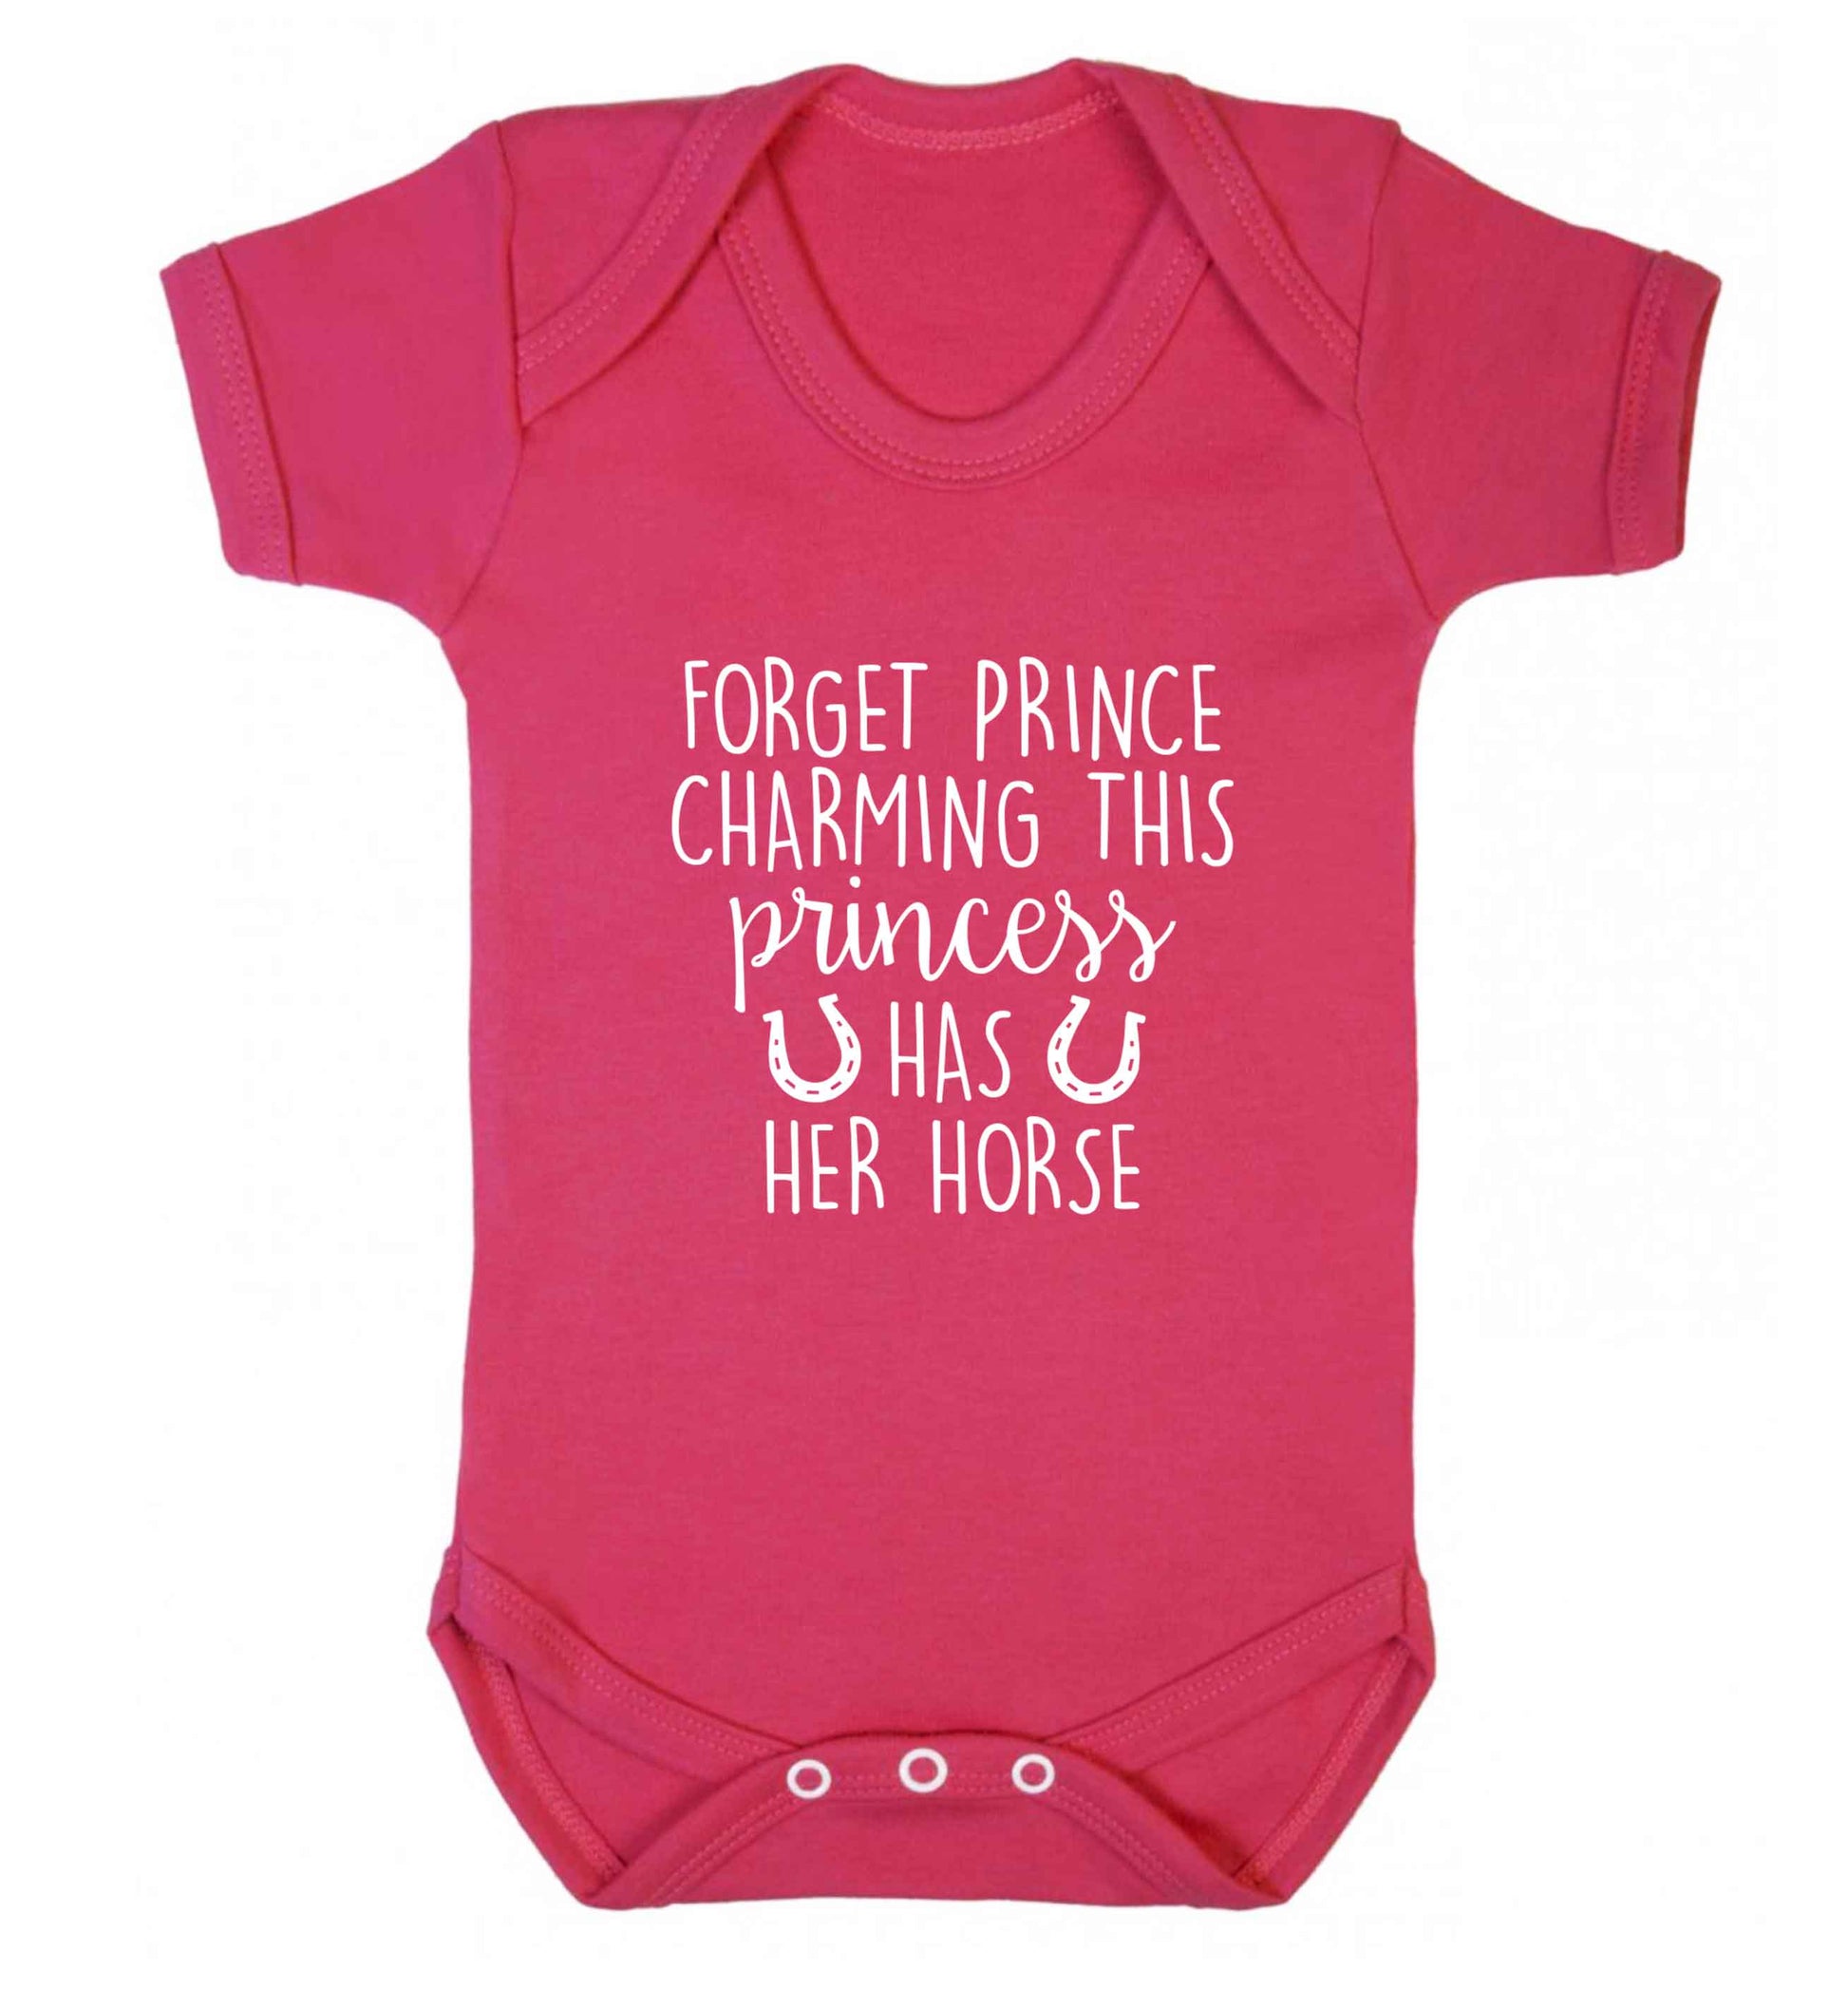 Forget prince charming this princess has her horse baby vest dark pink 18-24 months